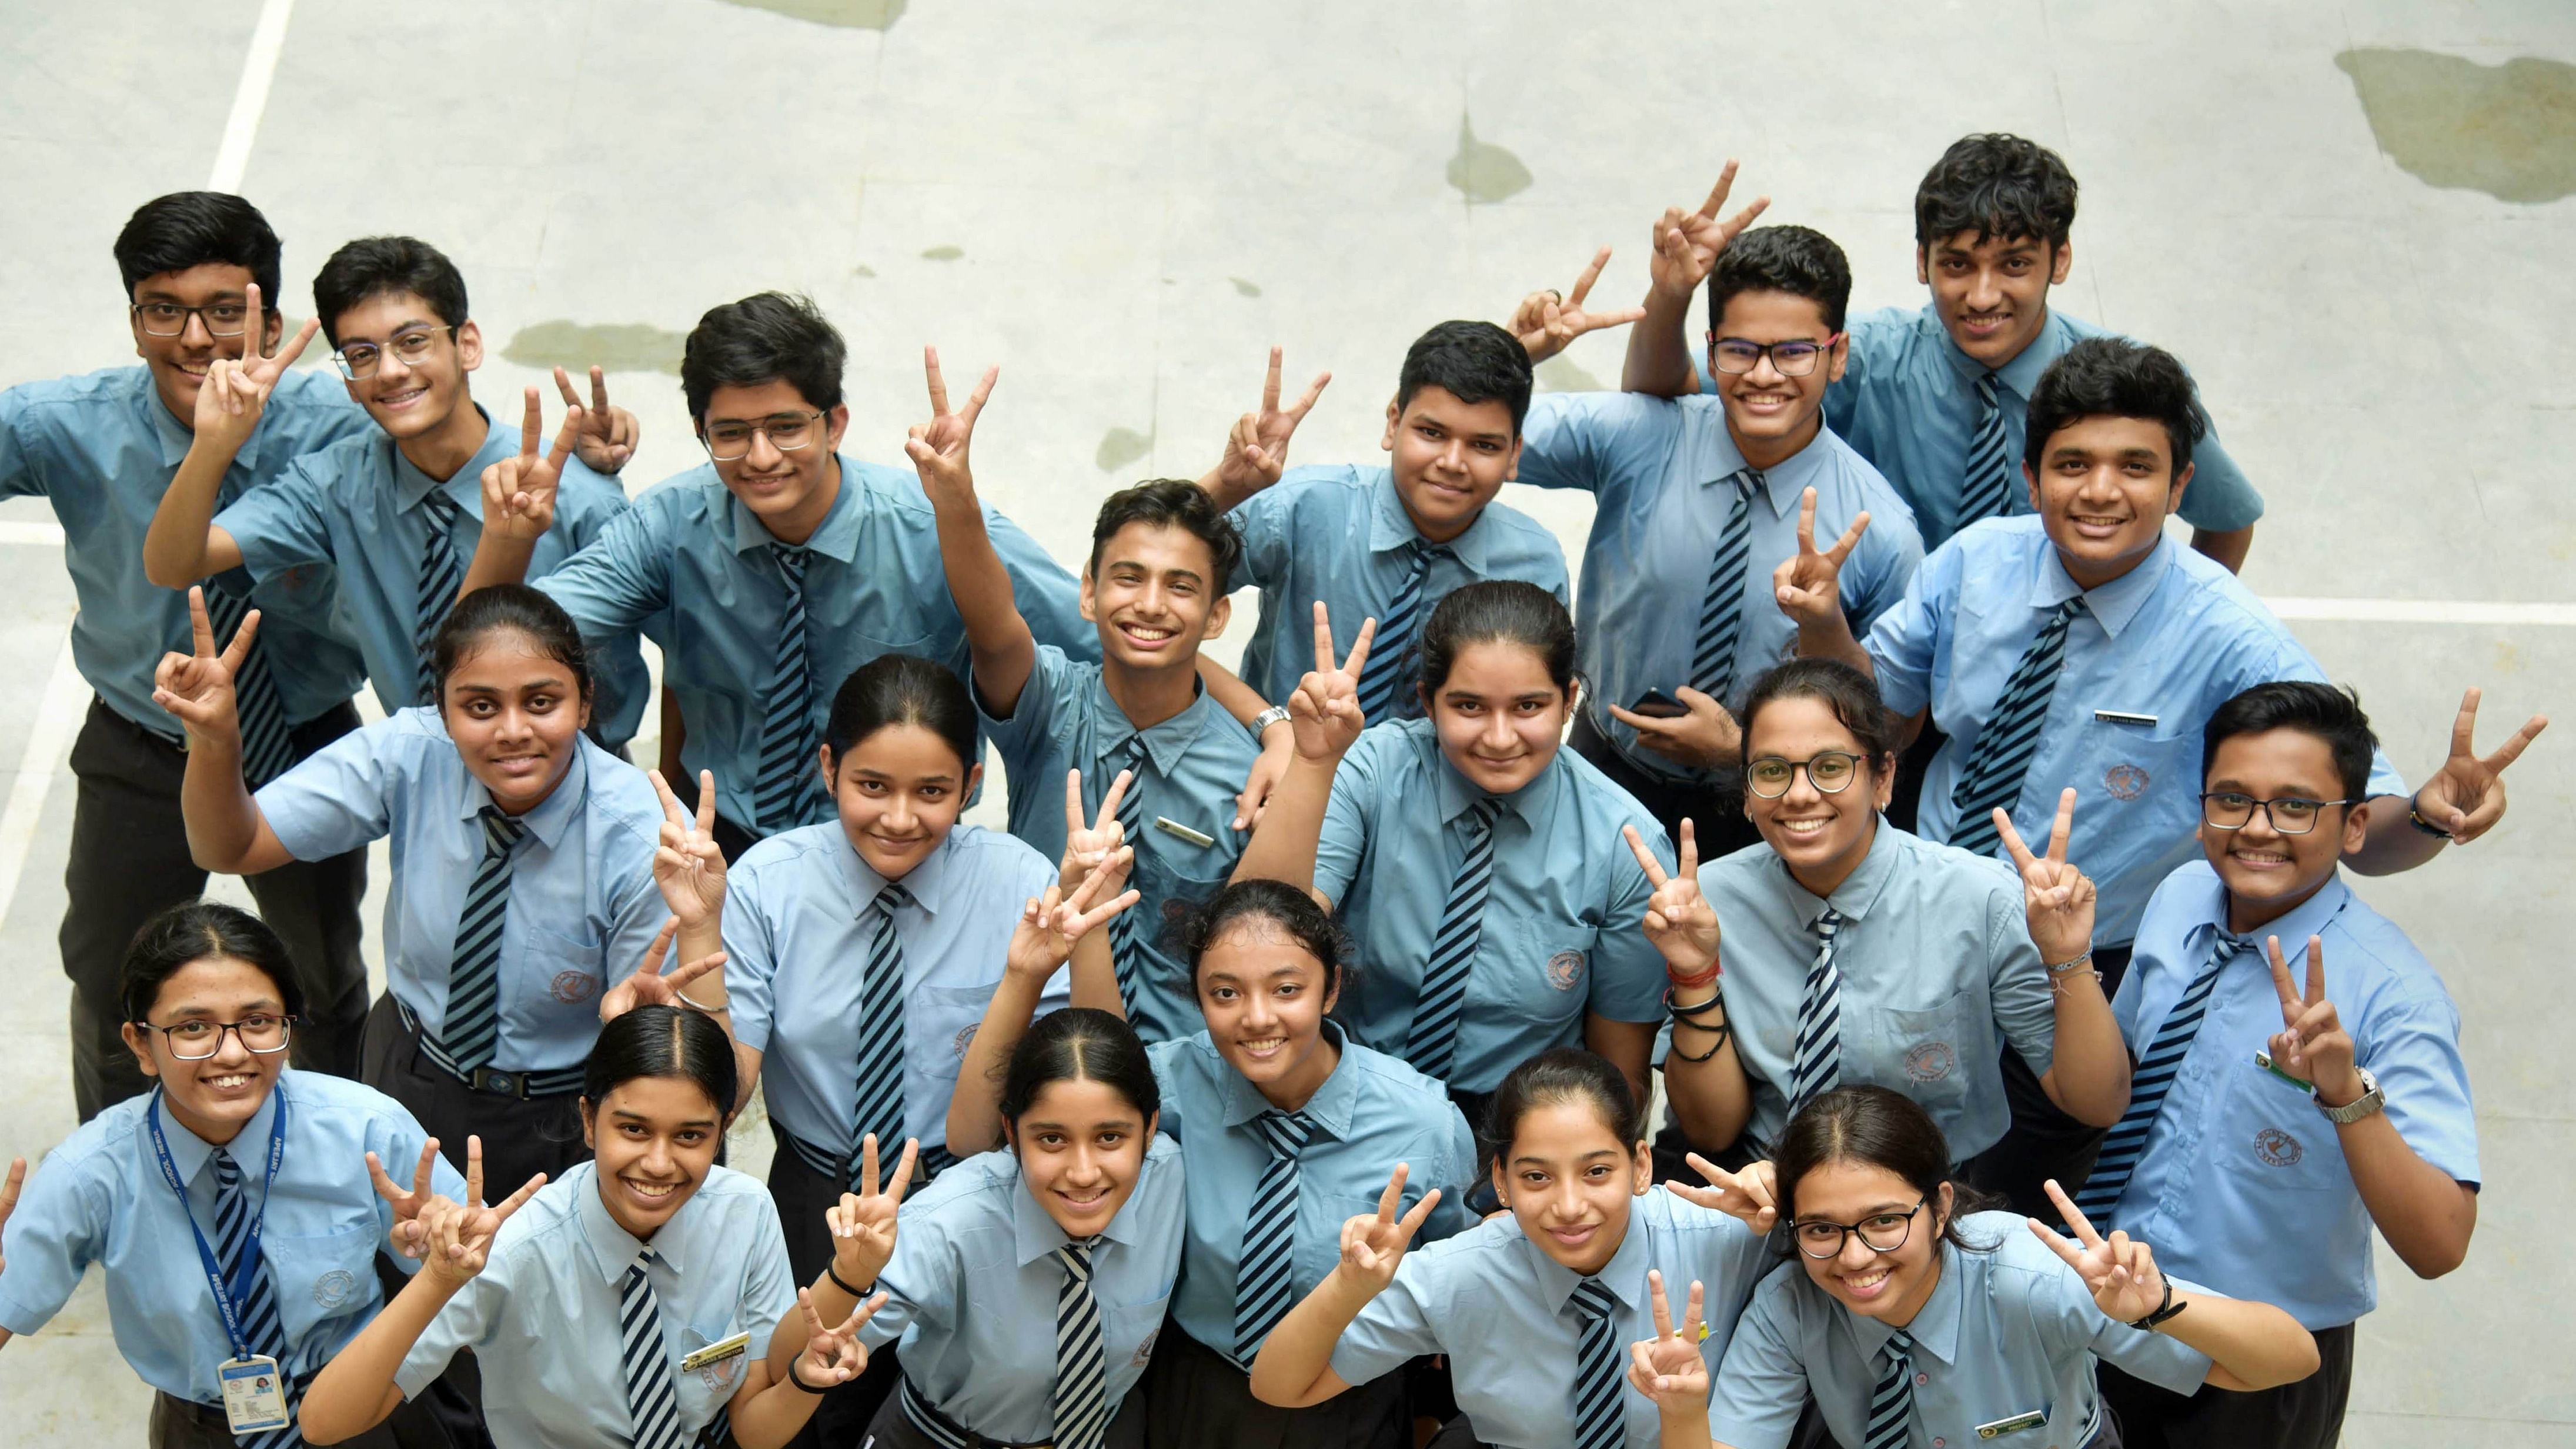  Students of Apeejay School celebrate after announcement of CBSE class 1oth results, in Bhubaneswar. Credit: PTI Photo